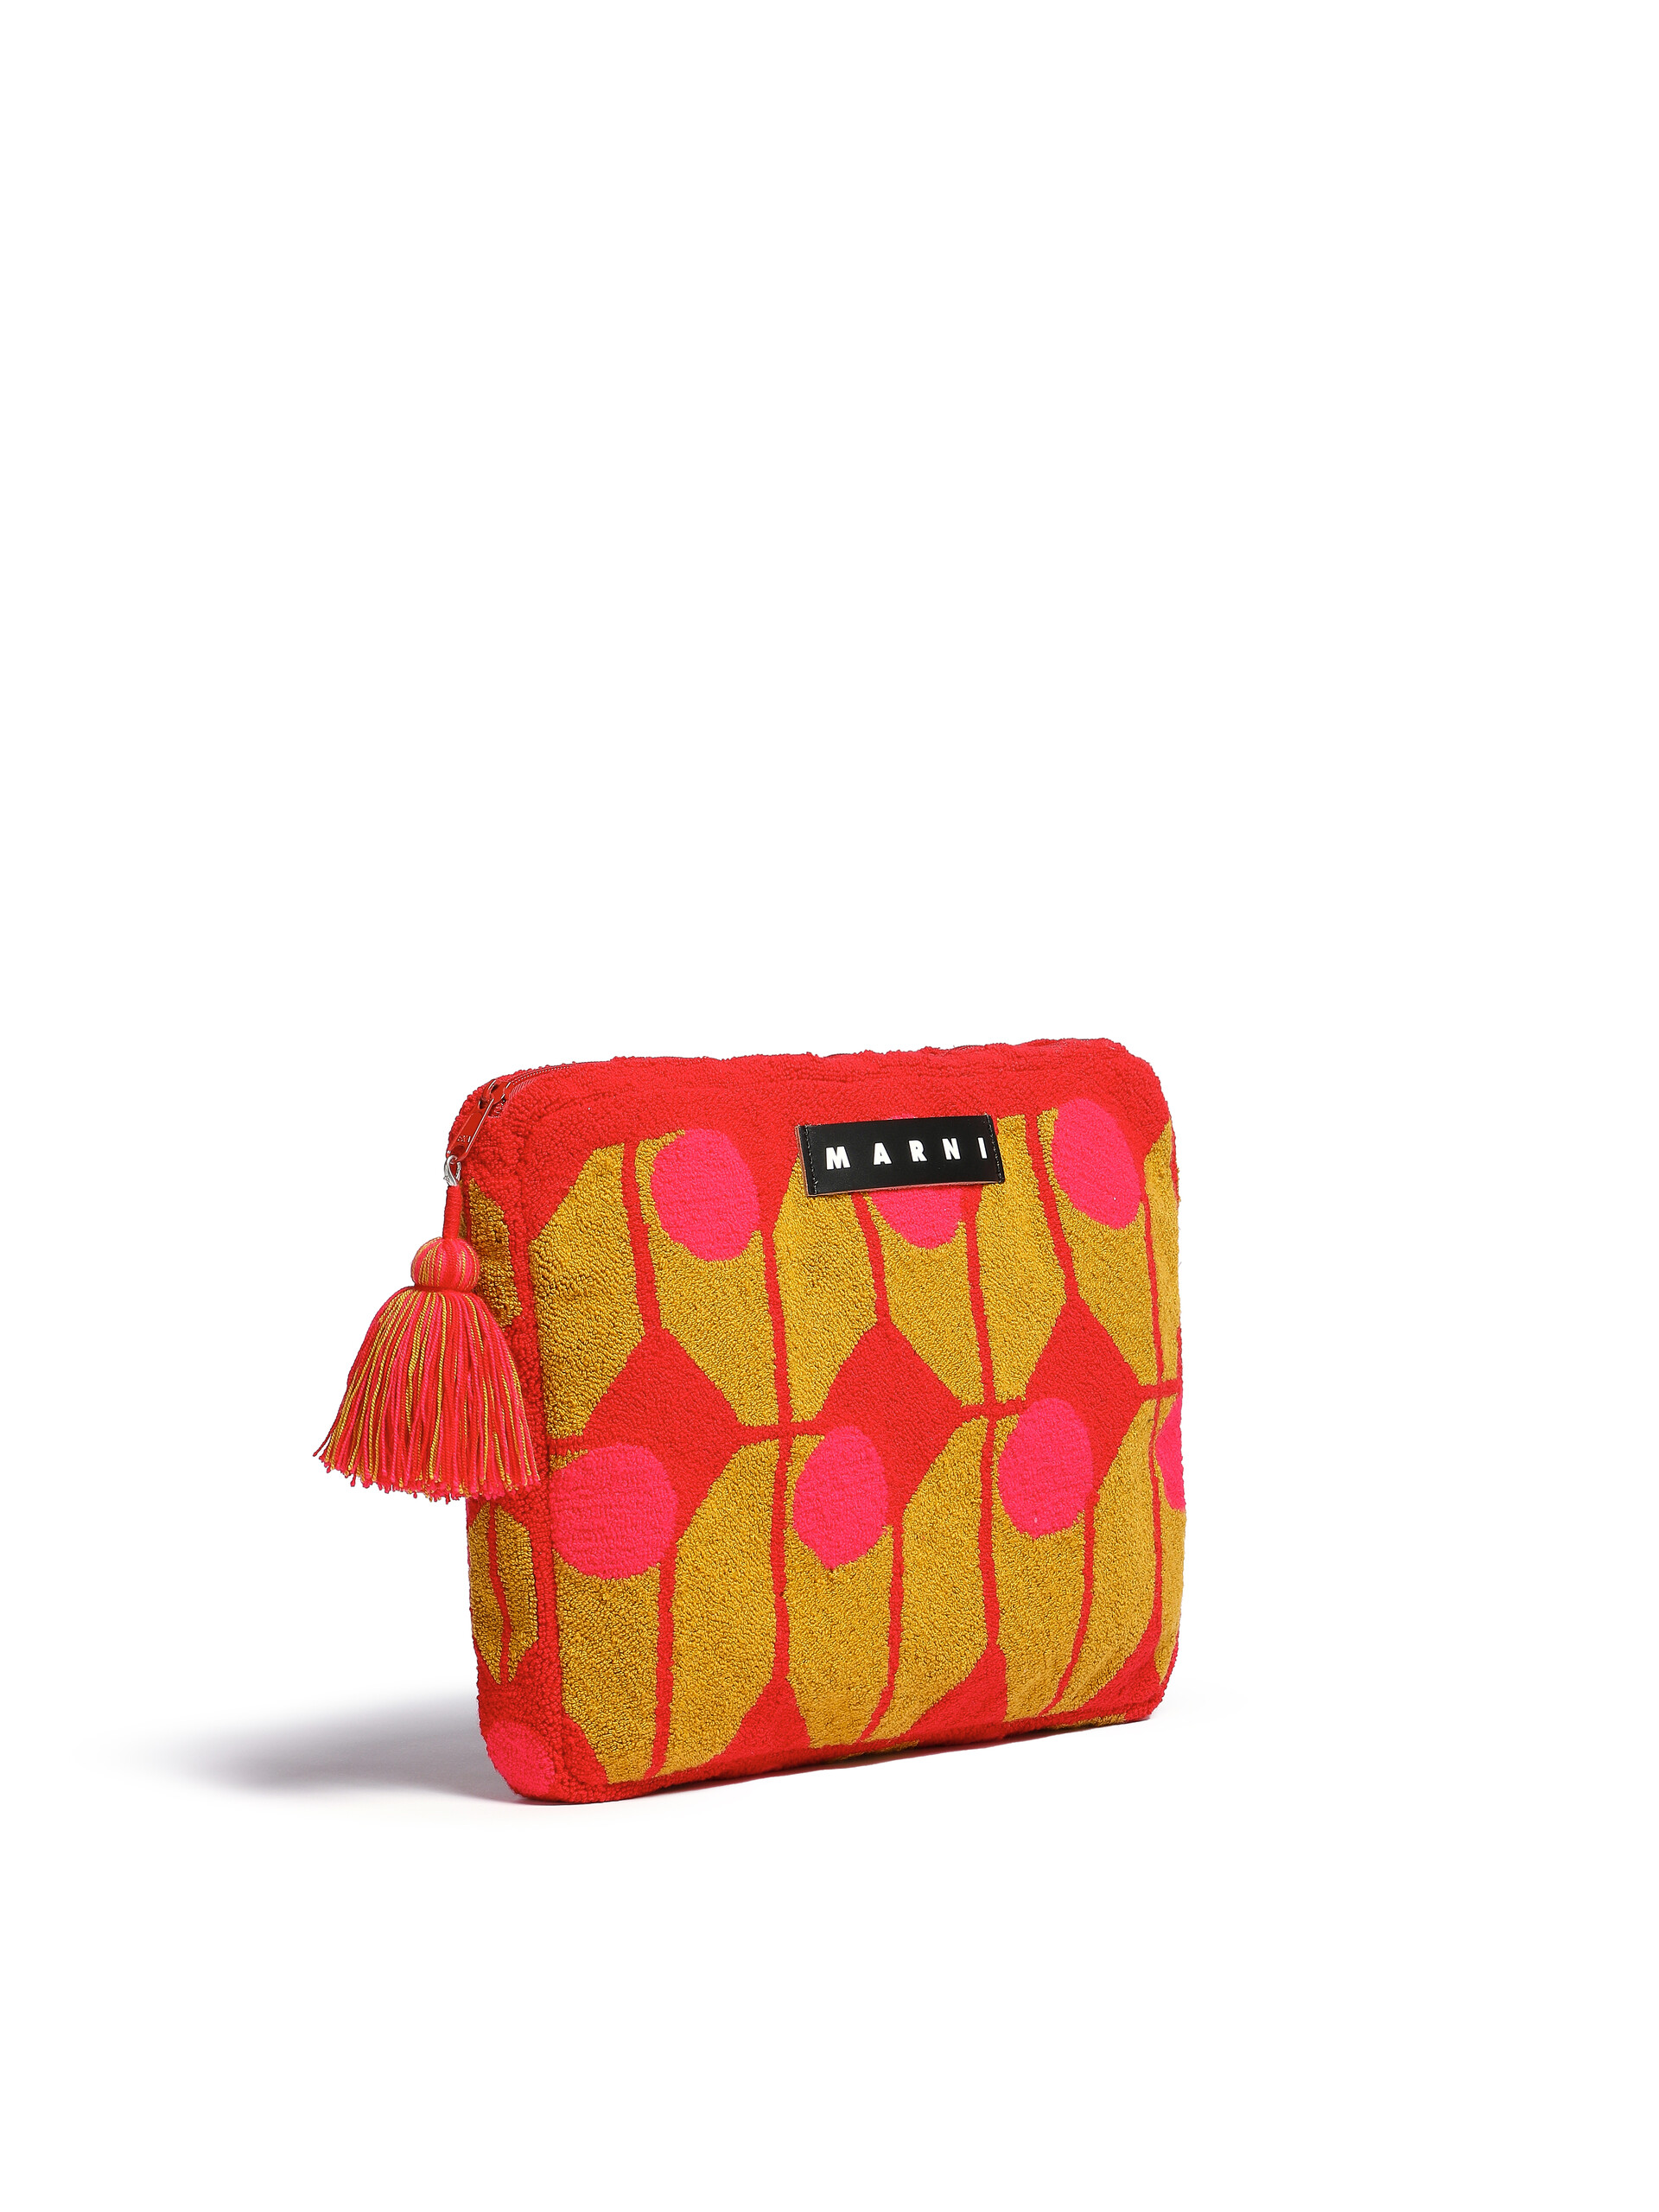 Red and gold Marni Market wool laptop case - Bags - Image 2